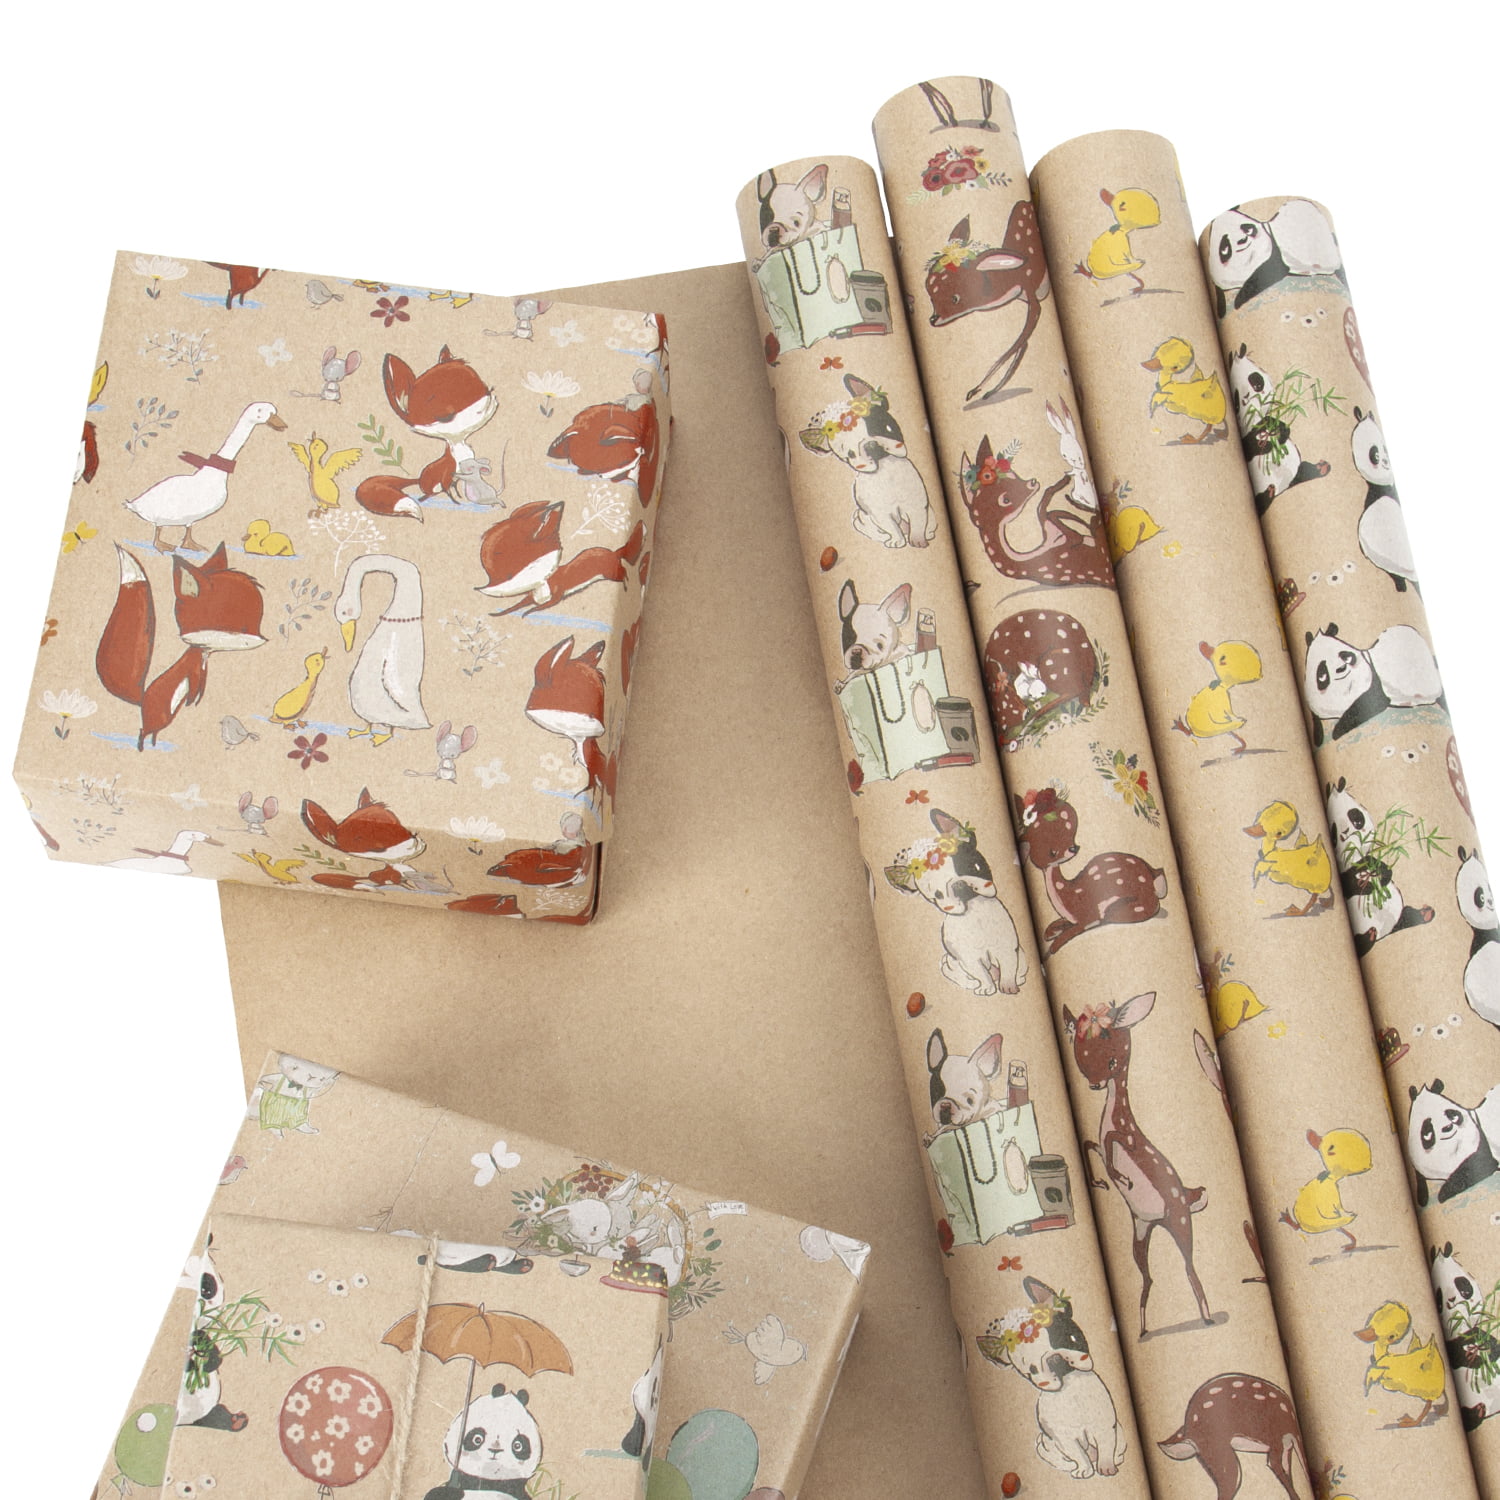 RUSPEPA Wrapping Paper, colorful Hot Silver Black Kraft Paper - Unicorn,  Alpaca and crown Design - 17.5 x 30 Inches Each Sheet